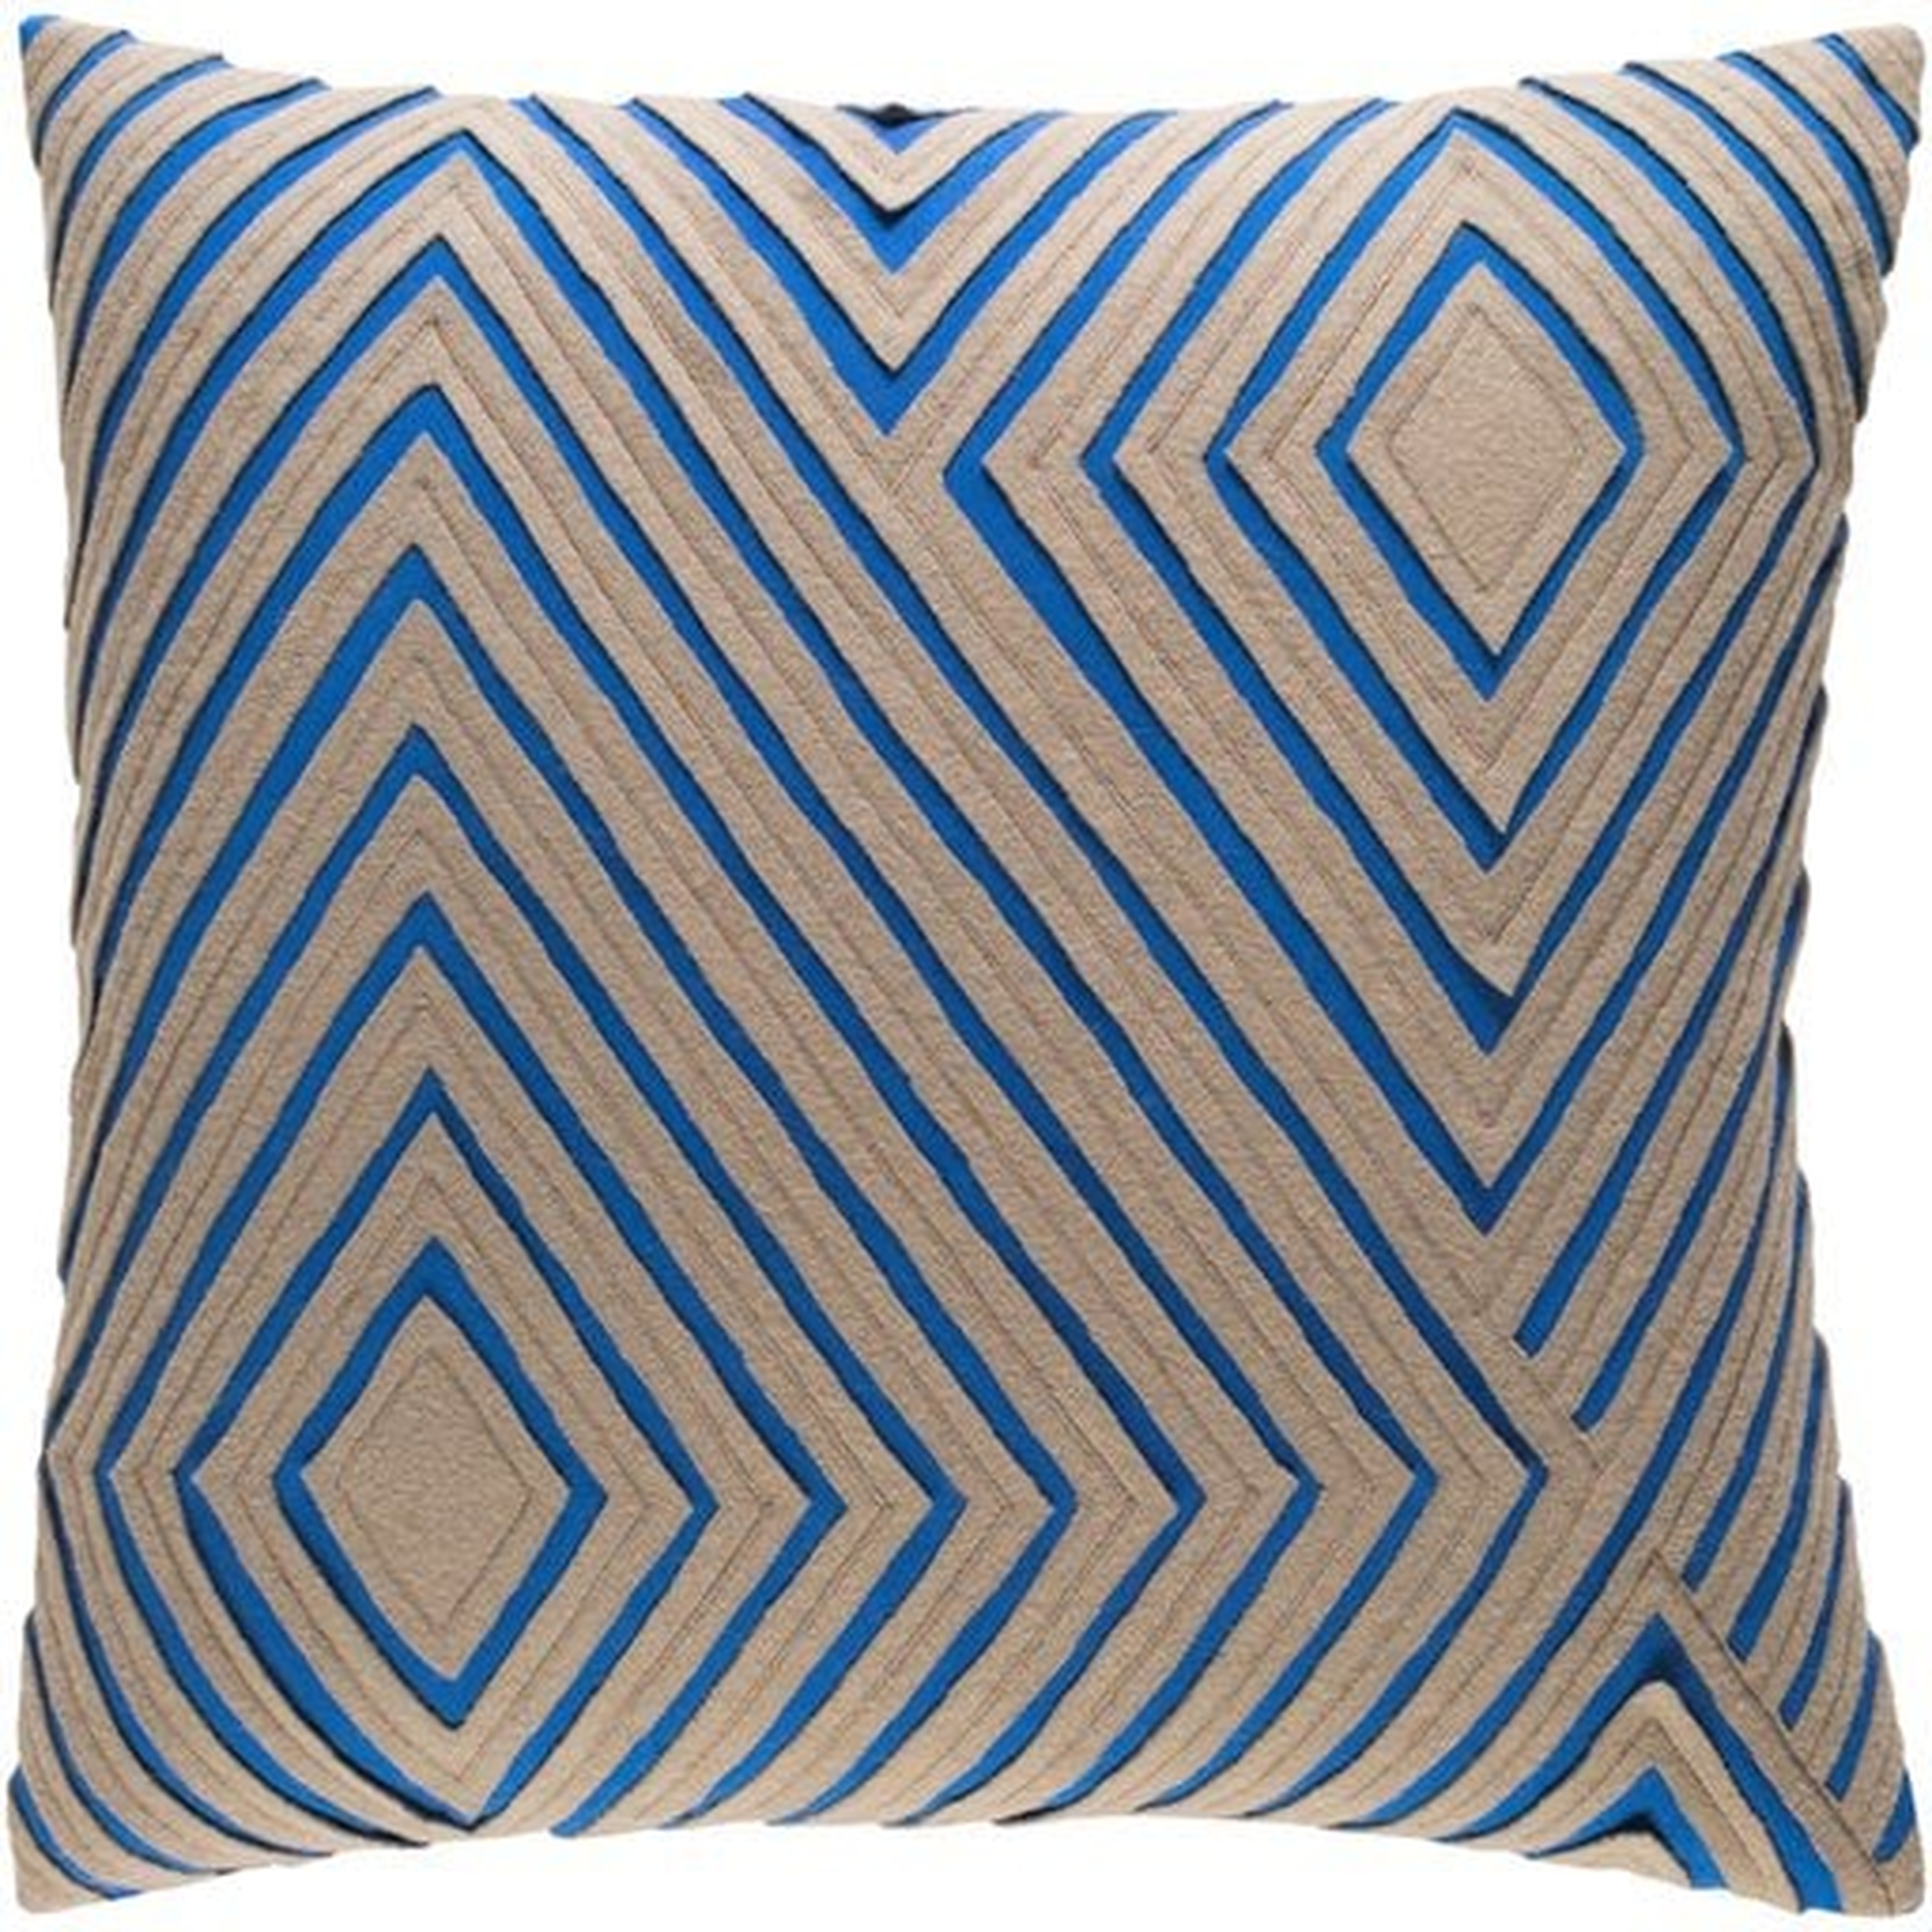 Denmark Throw Pillow, 18" x 18", with poly insert - Surya